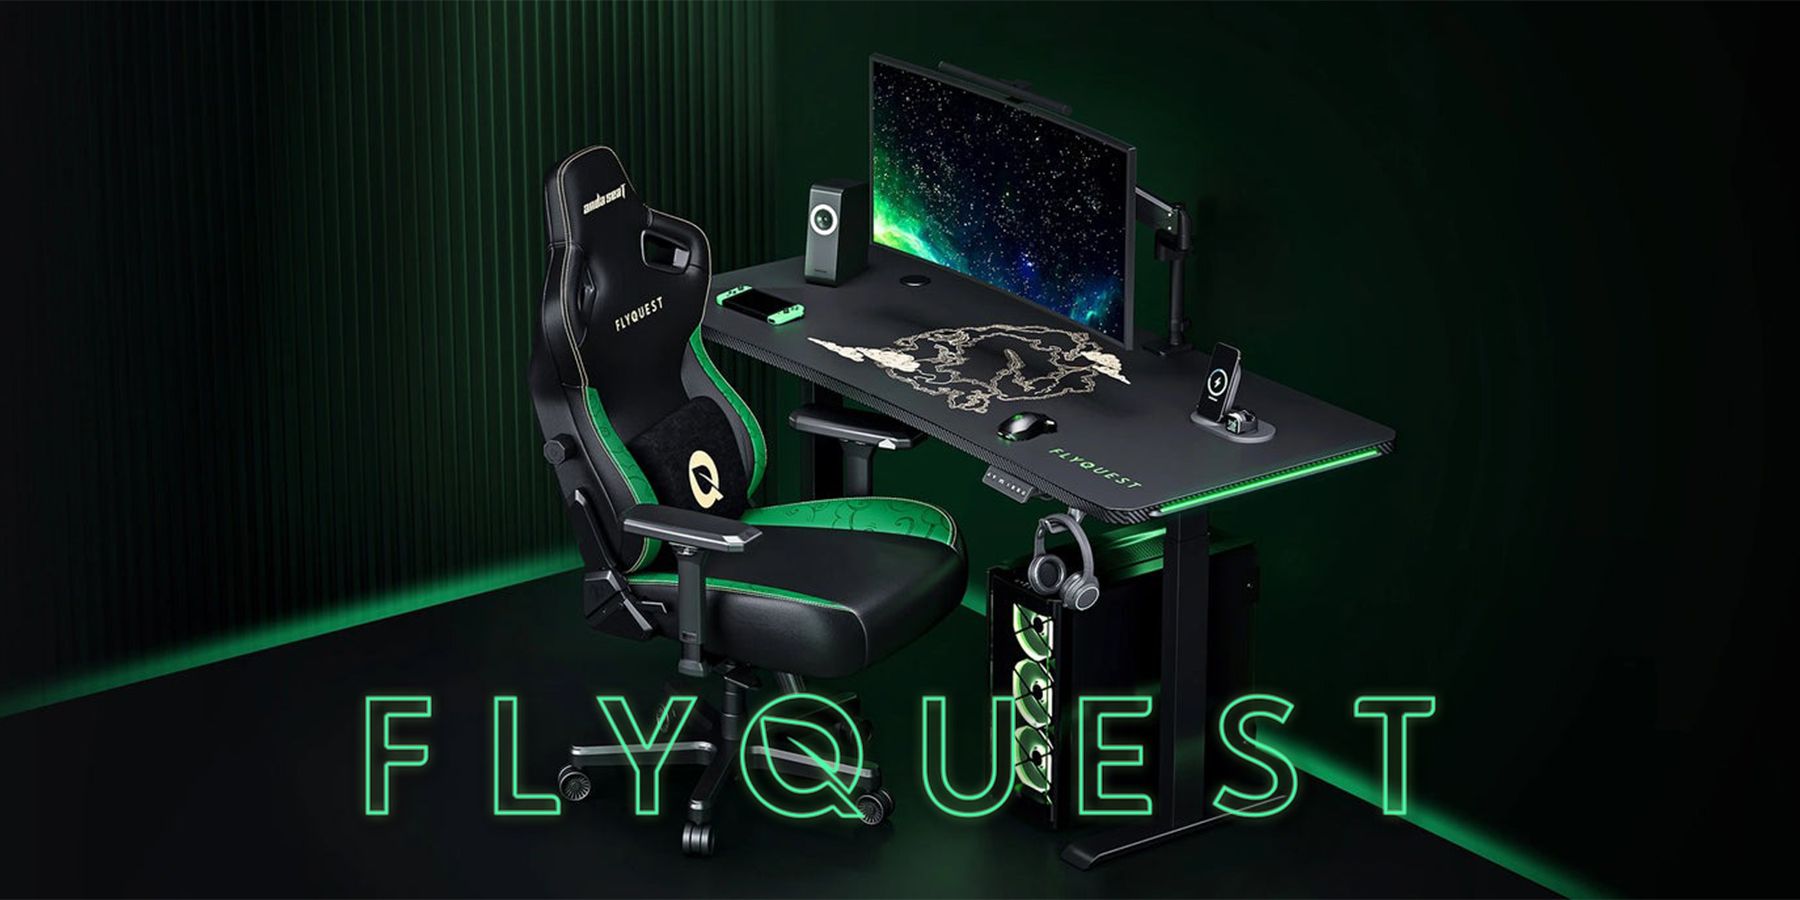 andaseat flyquest edition gaming desk review